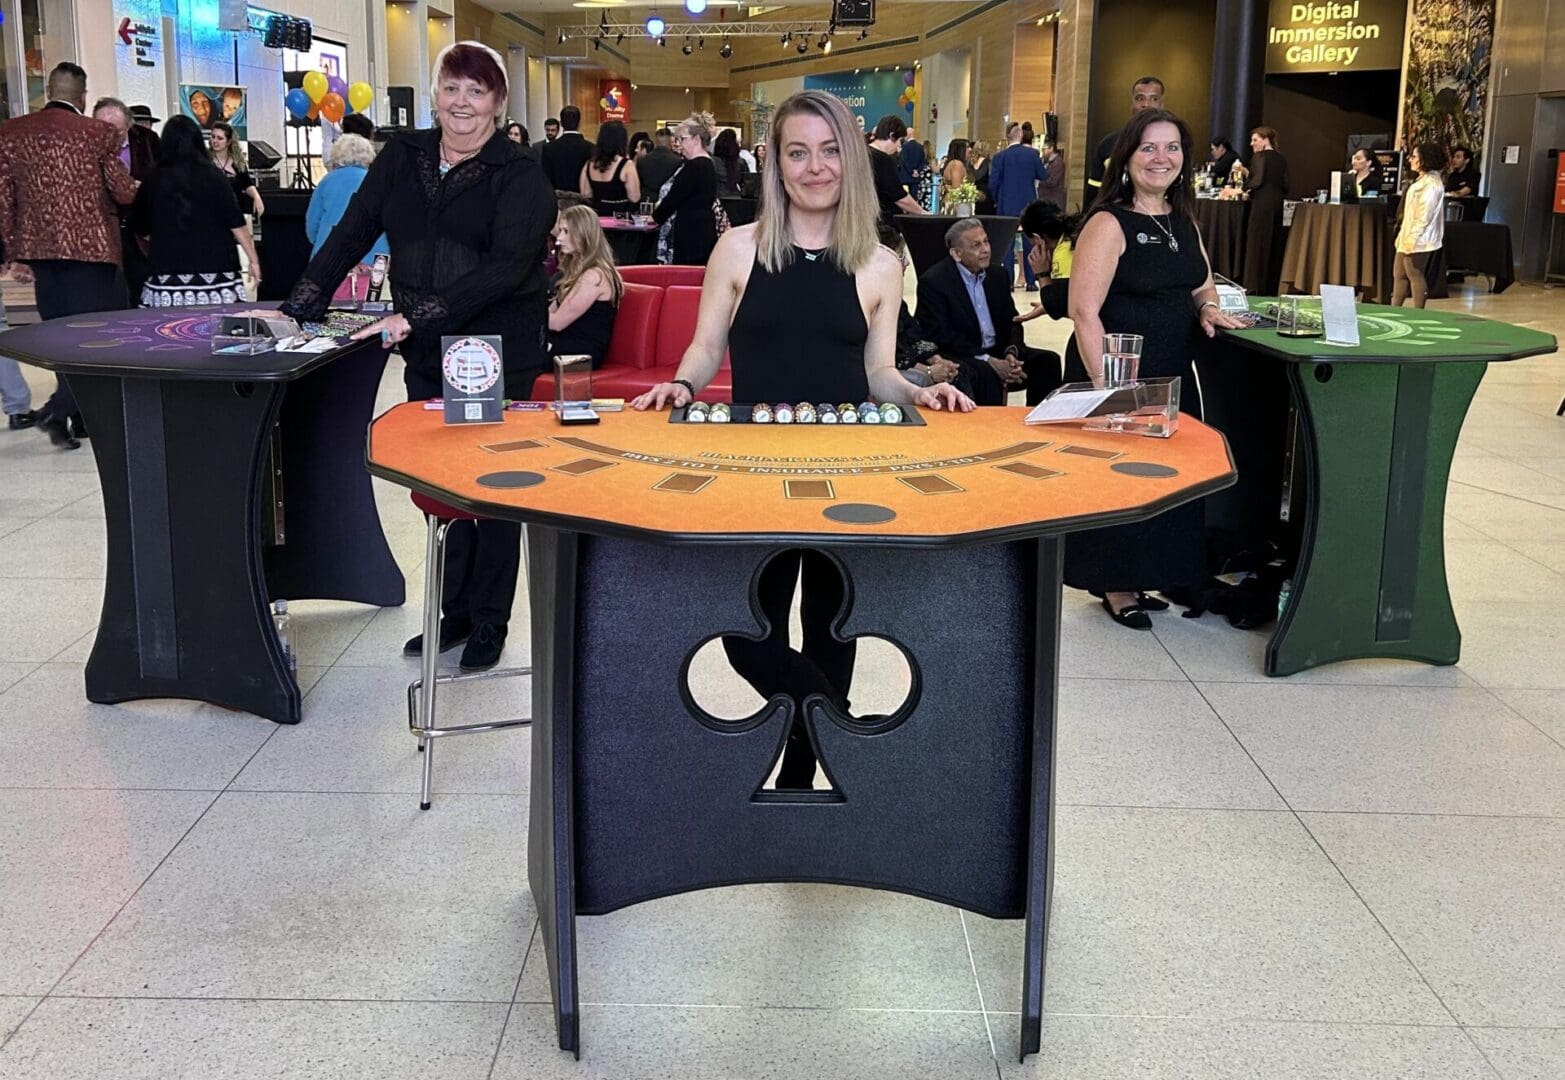 A woman standing behind a table with a black and orange design.